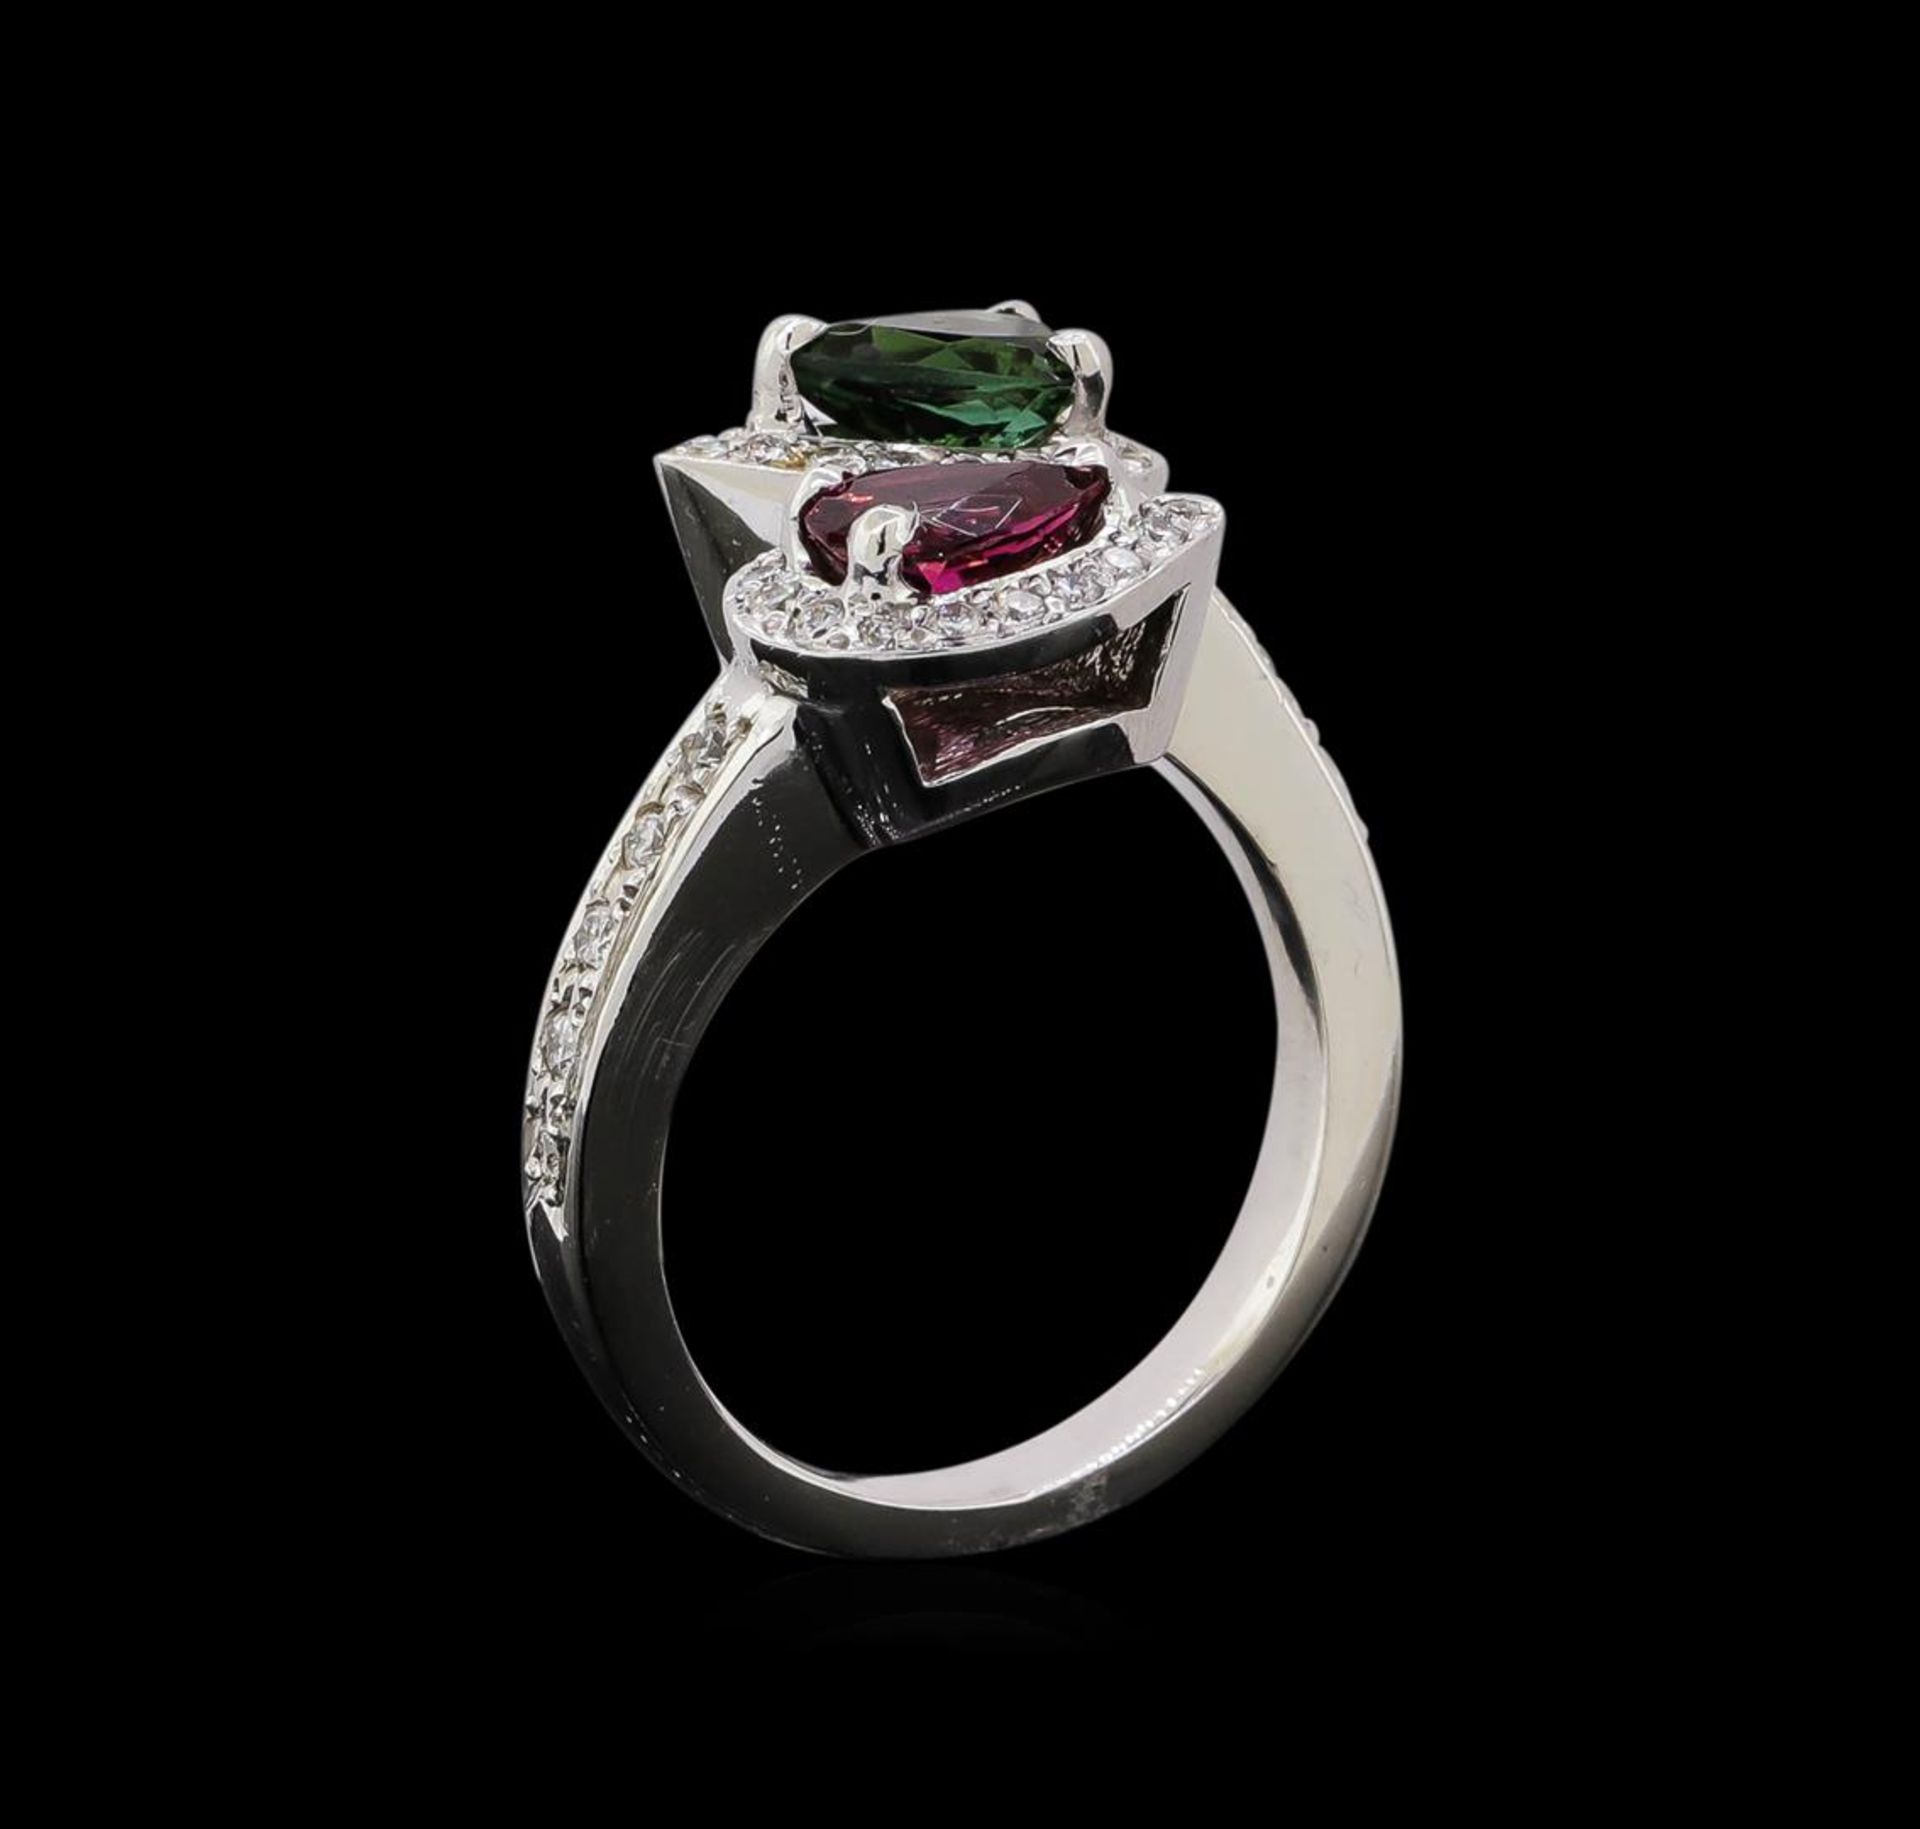 1.22 ctw Tourmaline and Diamond Ring - 14KT White Gold - Image 4 of 4